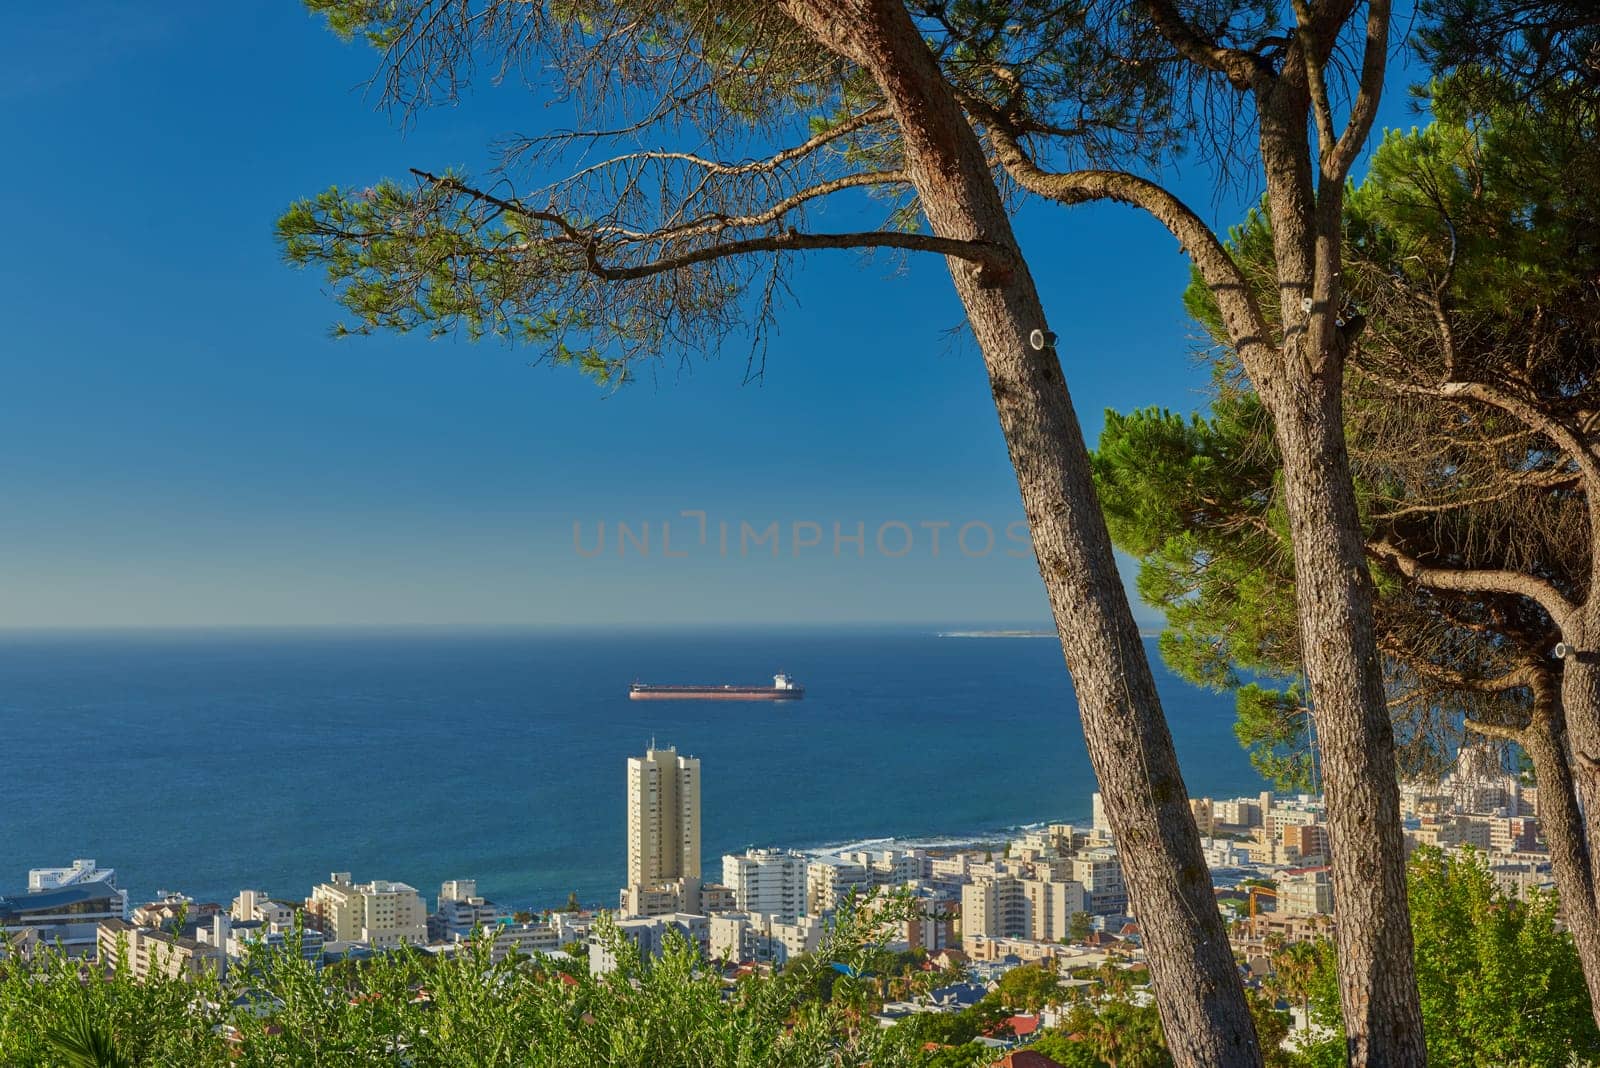 City, skyline and trees with ocean, landscape and sea for holiday location or outdoor journey. Miami, sunshine and infrastructure for road trip, travel or urban cityscape for scenic view for tourism.